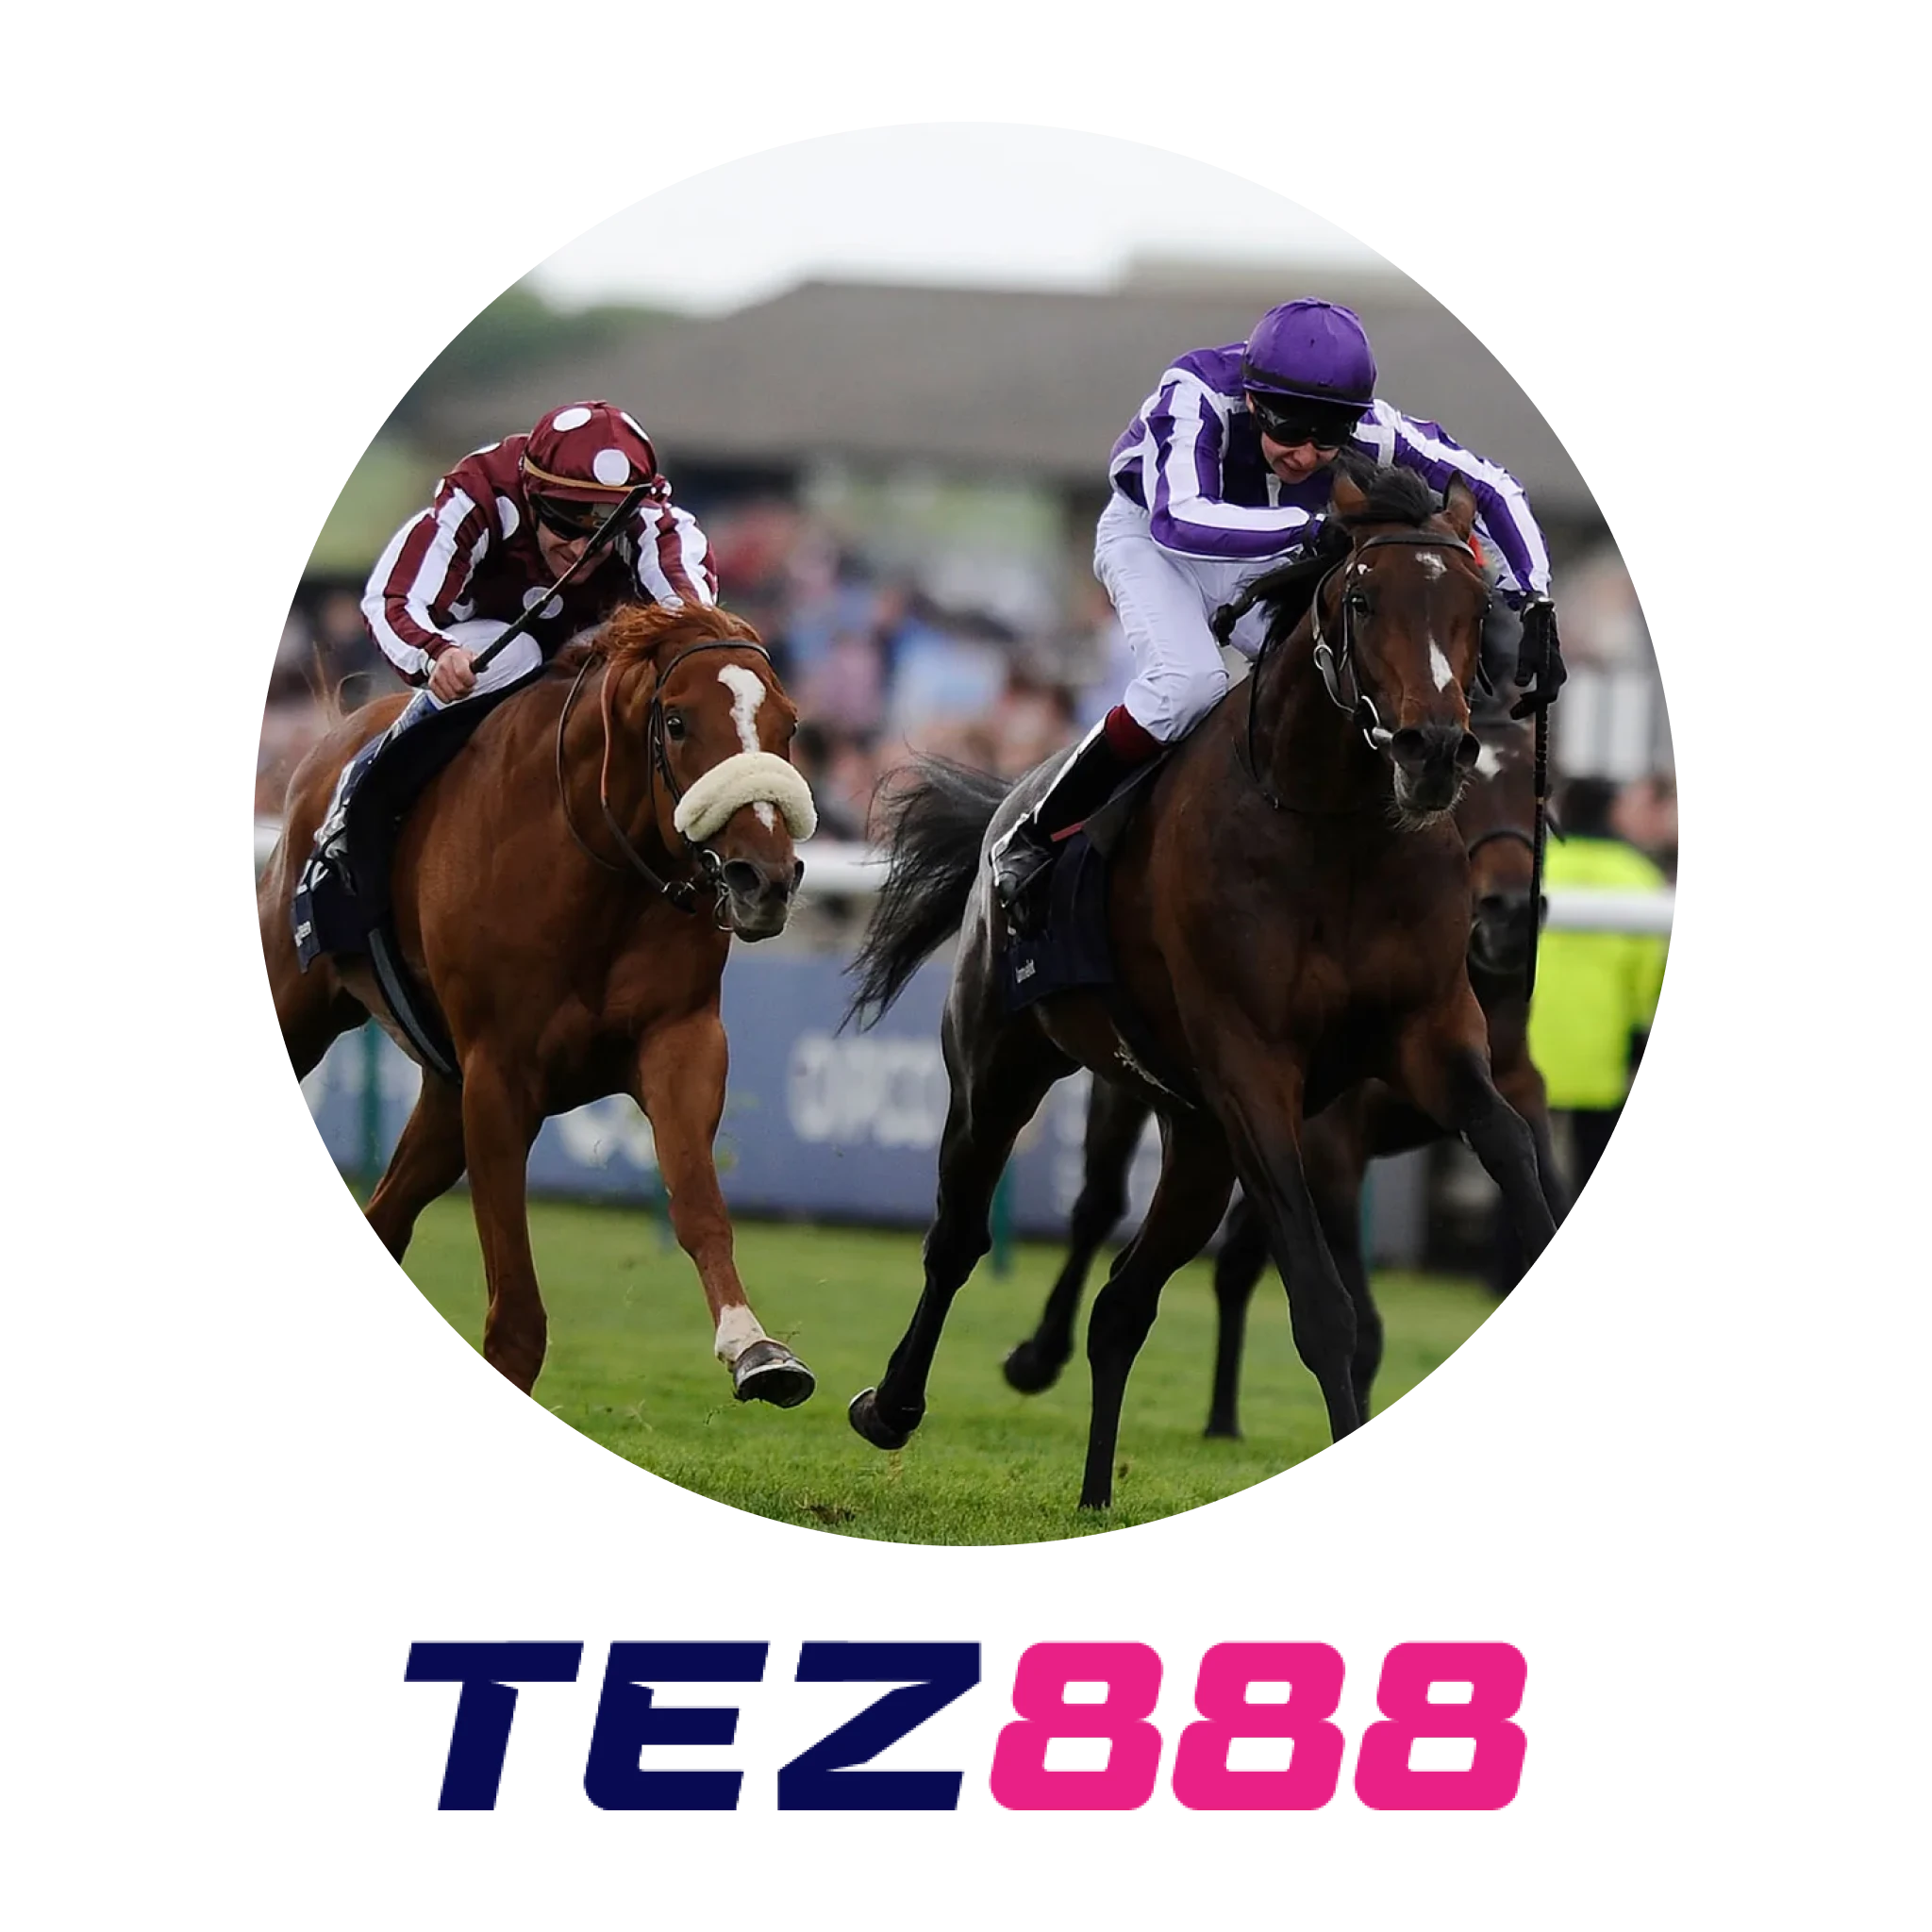 For Indian players, Tez888 stands as the premier choice for online horse racing betting.